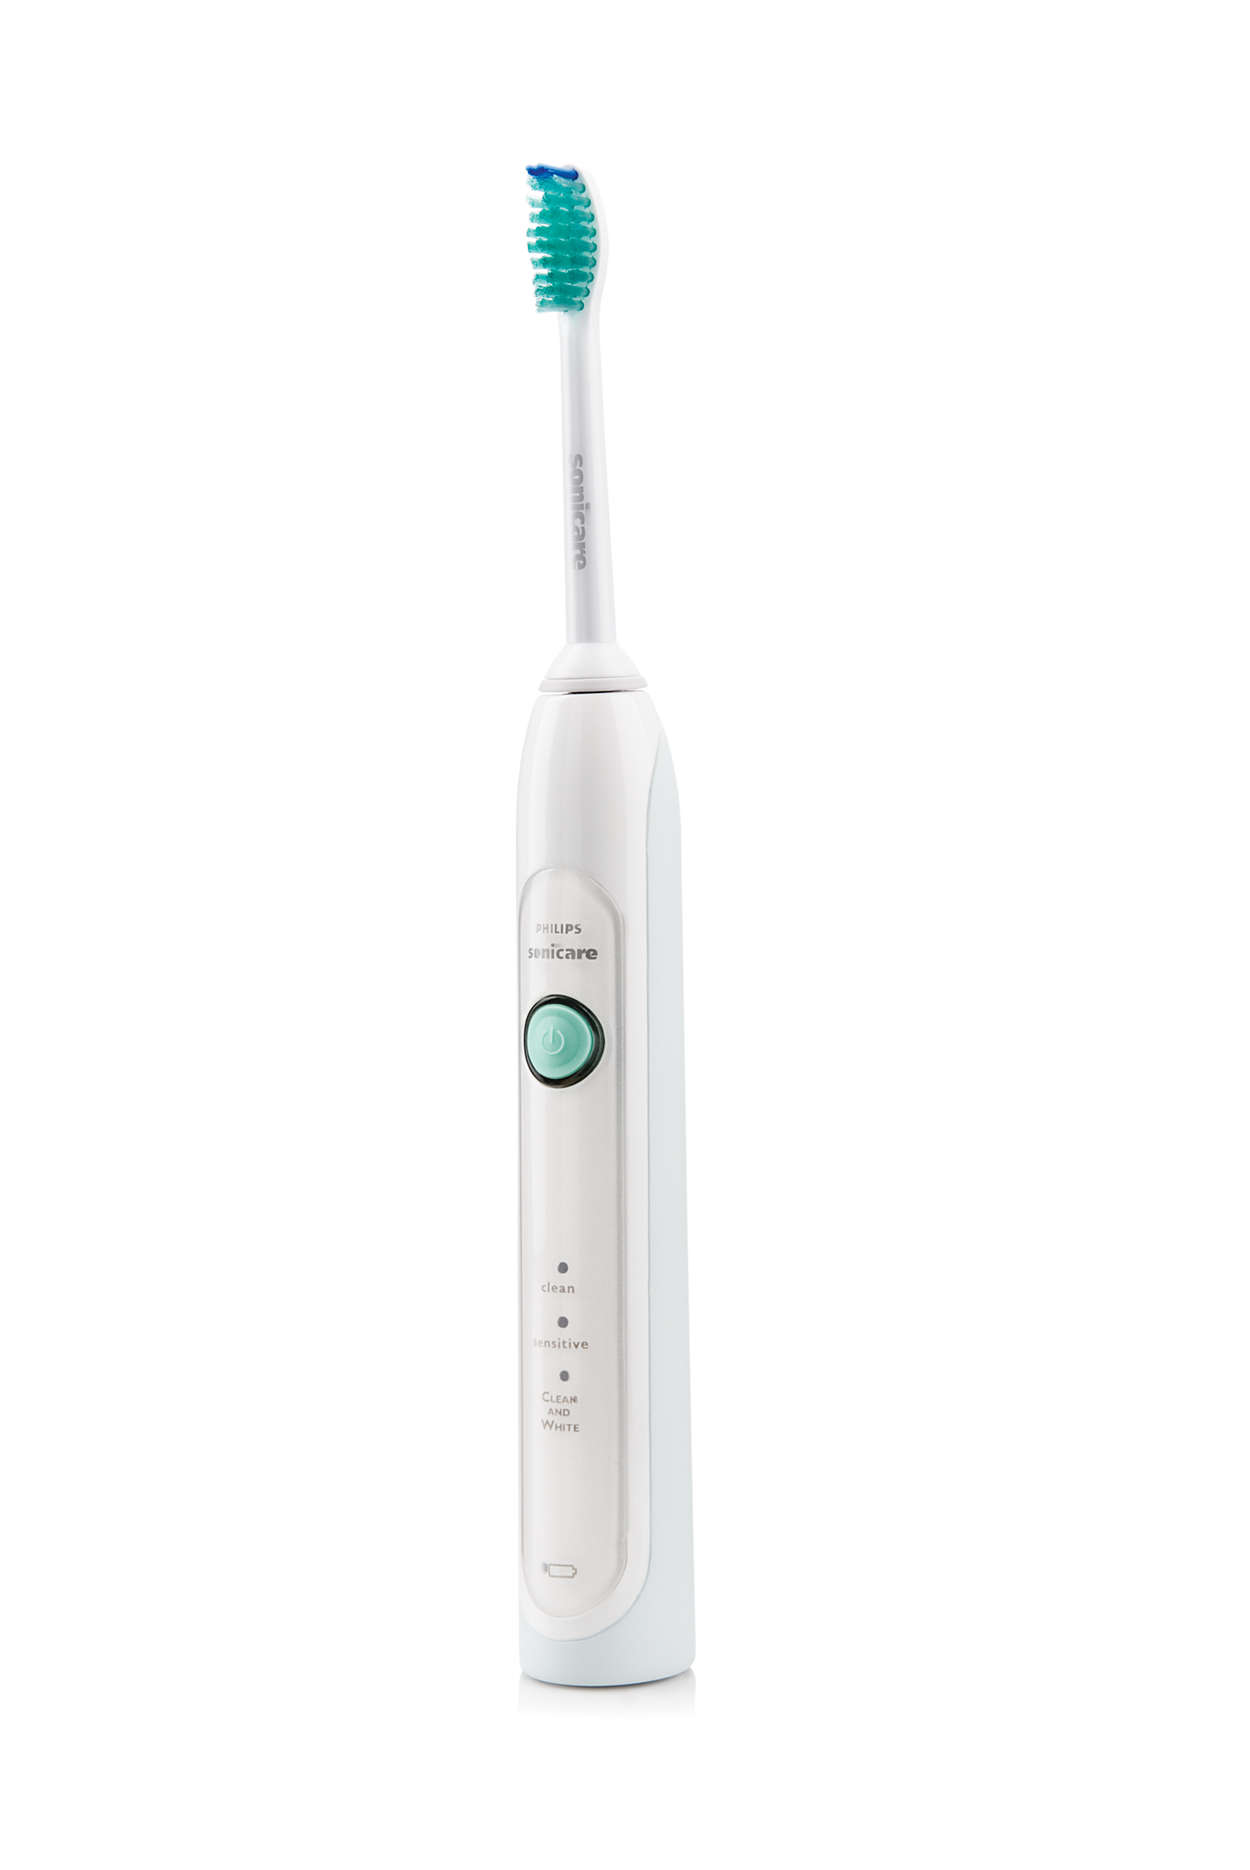 Nervous breakdown Just do Measurement HealthyWhite Sonic electric toothbrush HX6780/02 | Sonicare